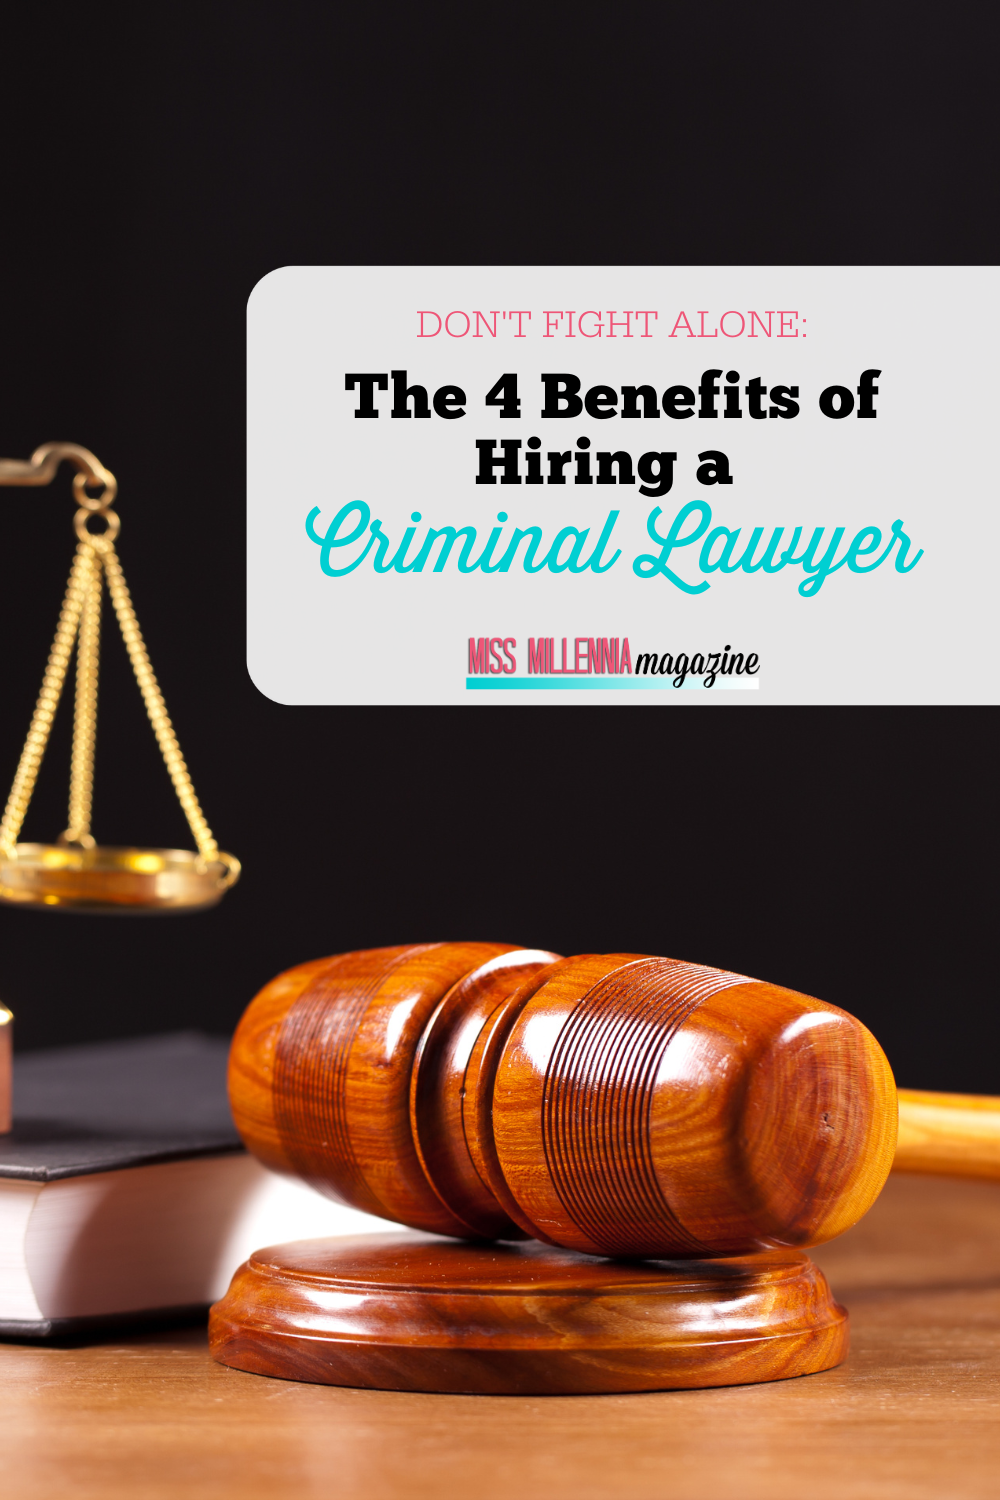 Don’t Fight Alone: The 4 Benefits of Hiring a Criminal Lawyer